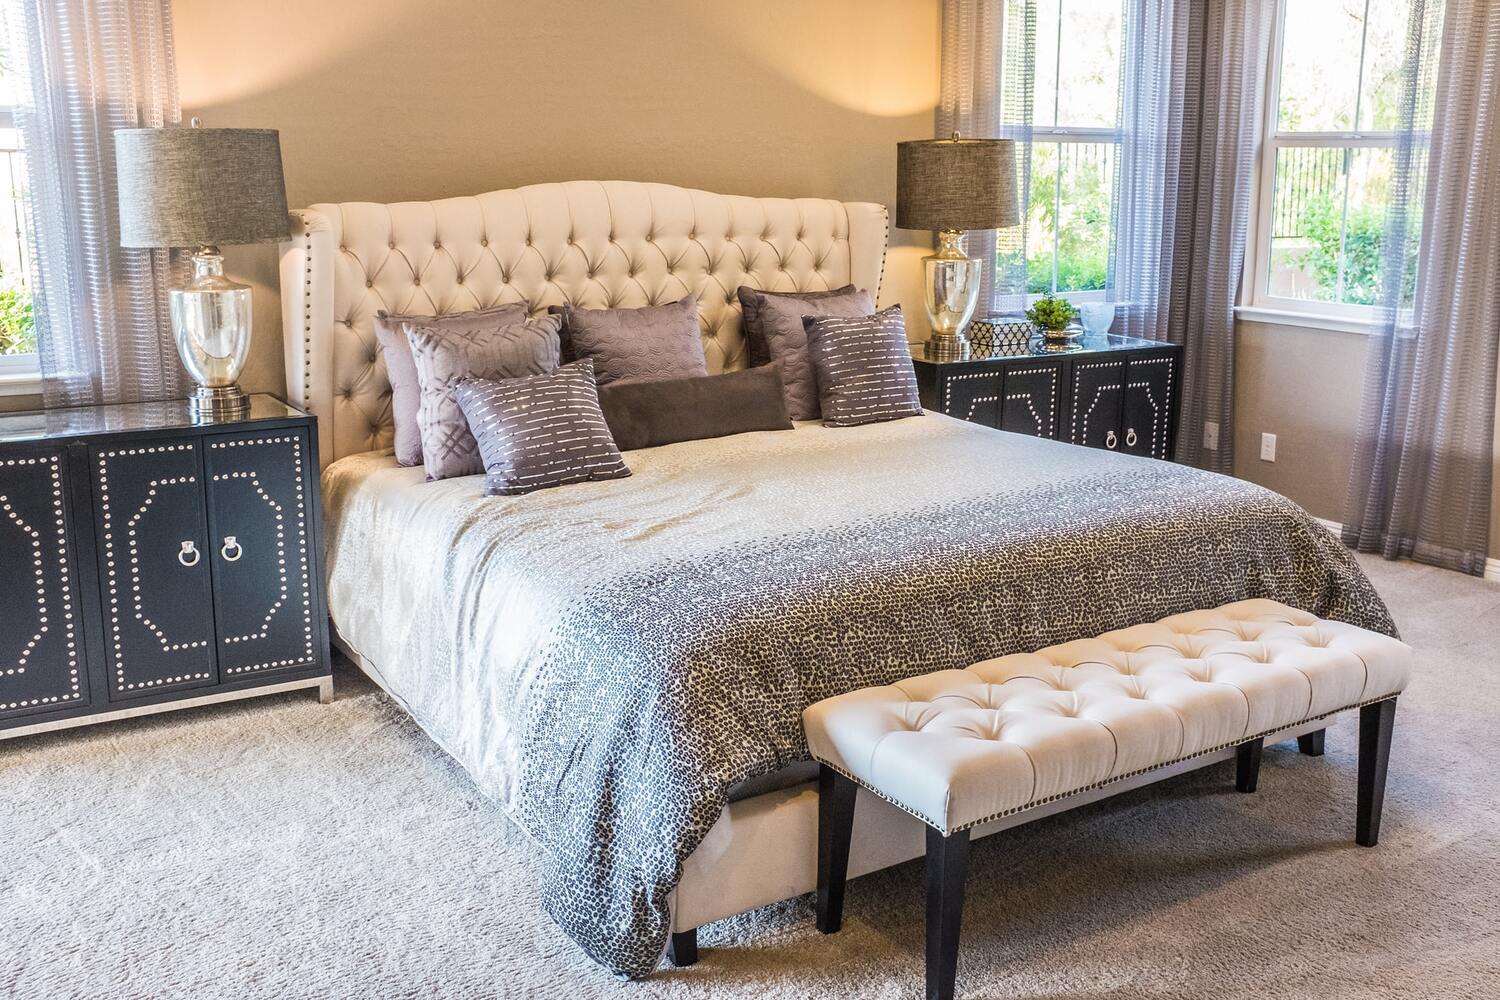 Why Is A Headboard Important In Feng Shui? Experts Share Their Advice